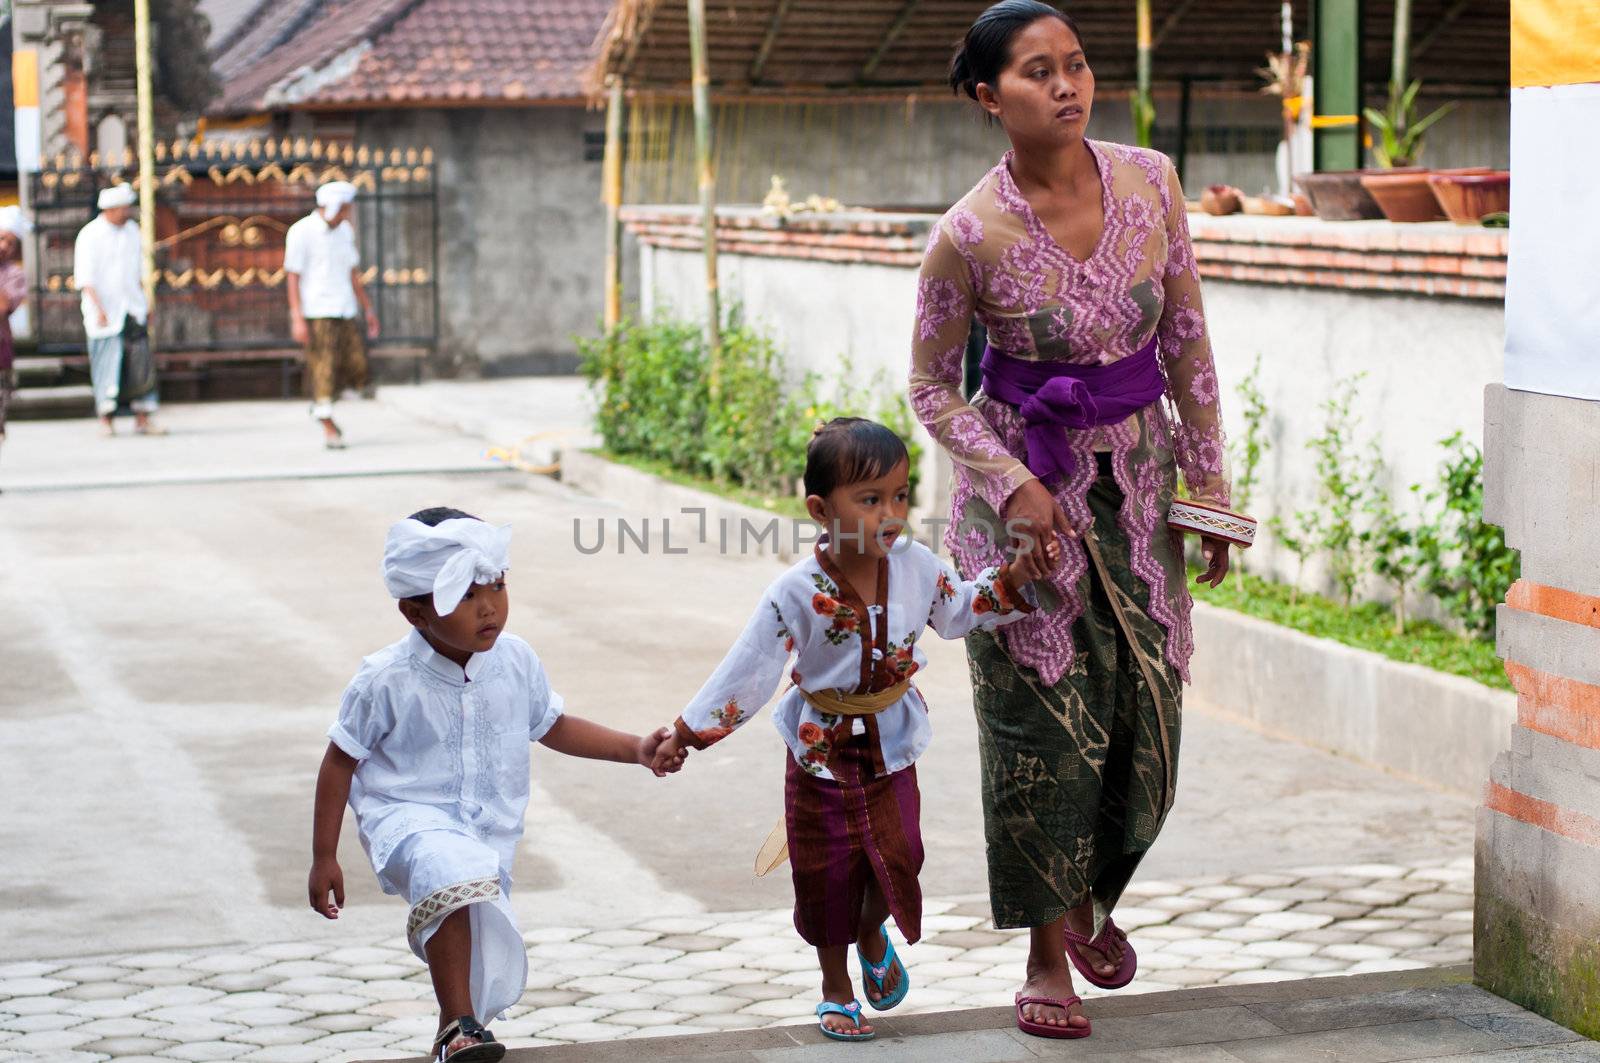 Tirta Empul, Bali, Indonesia - October 11, 2011: woman with here children walking to Tirta Empul Temple to give offerings to the spirits